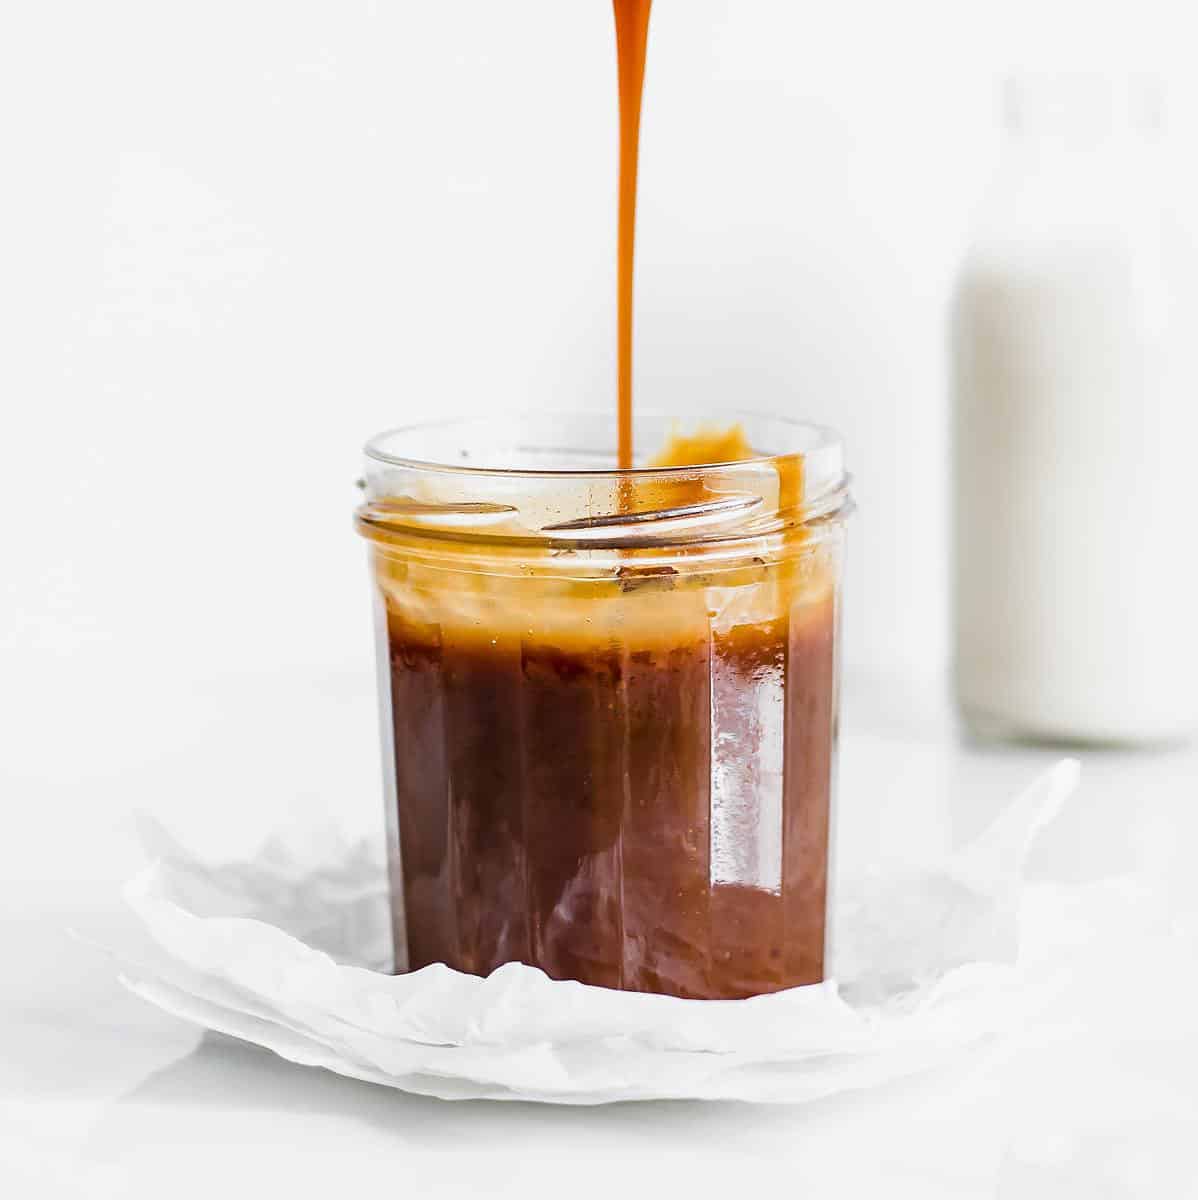  Give your vegan cakes and cupcakes an extra sweet boost with this delicious caramel sauce.